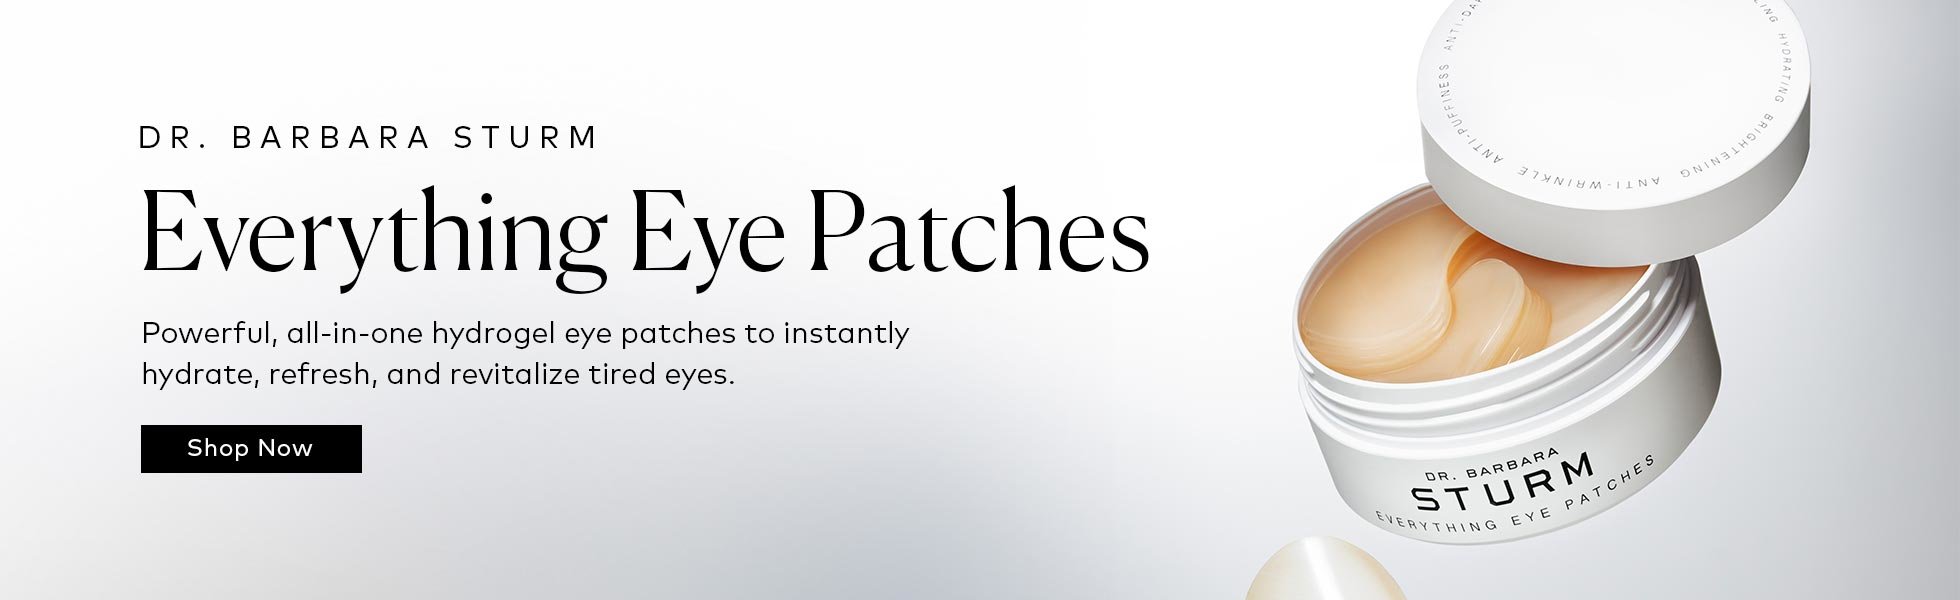 Shop the Dr. Barbara Sturm Everything Eye Patches at Beautylish.com